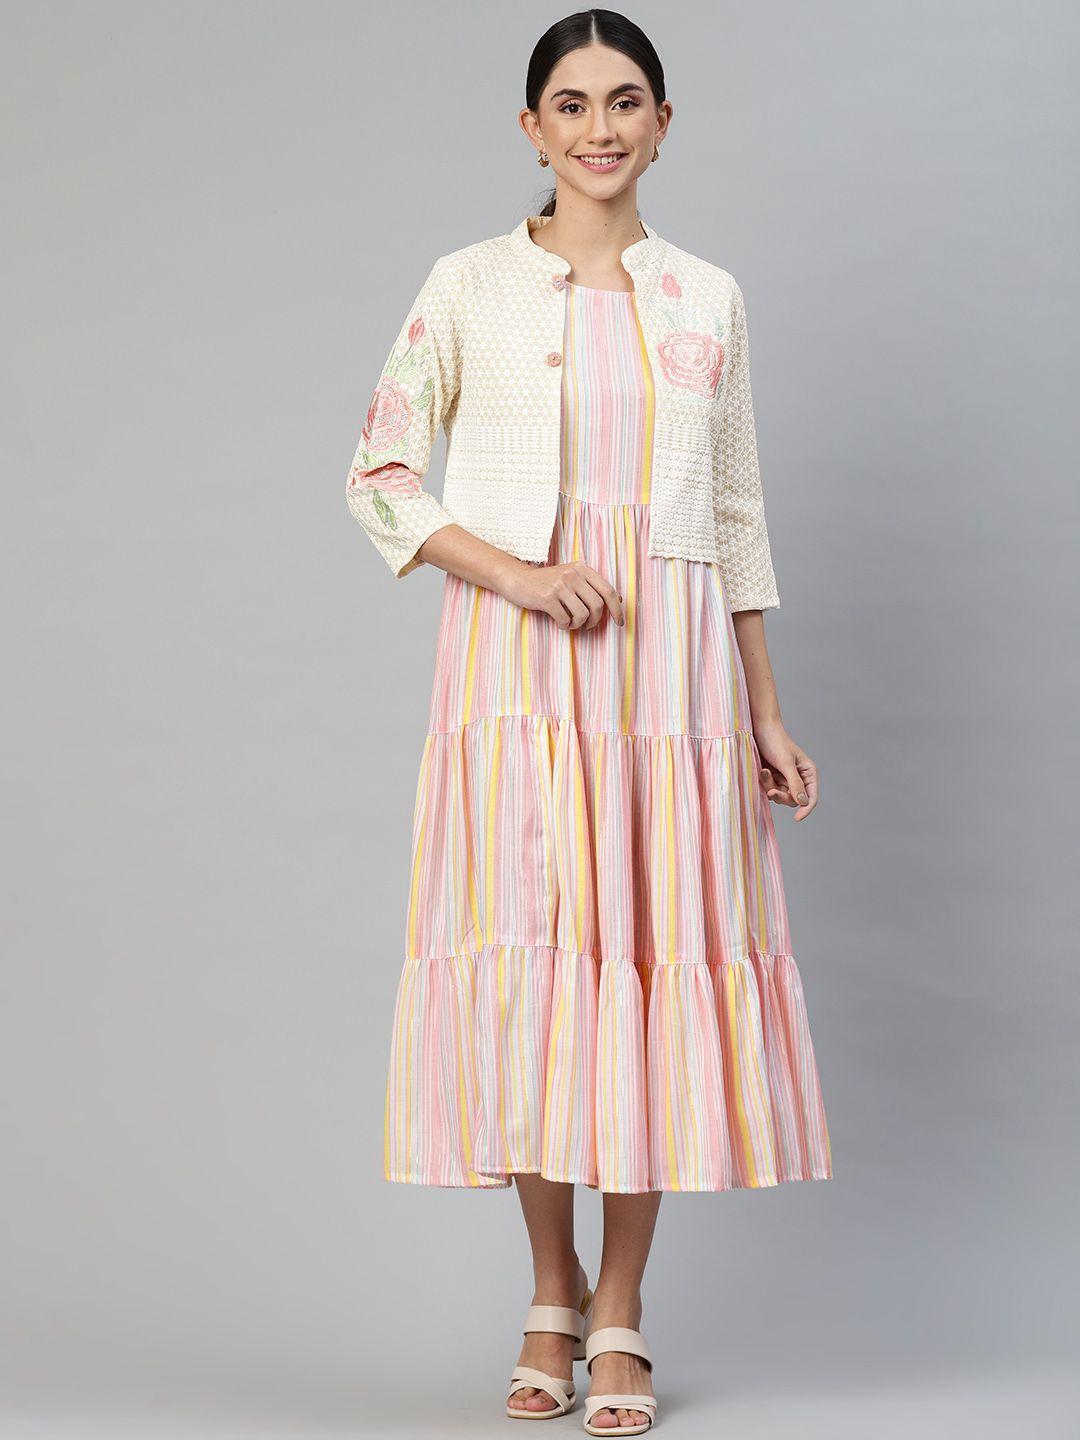 readiprint fashions pink & off white striped a-line midi dress with jacket